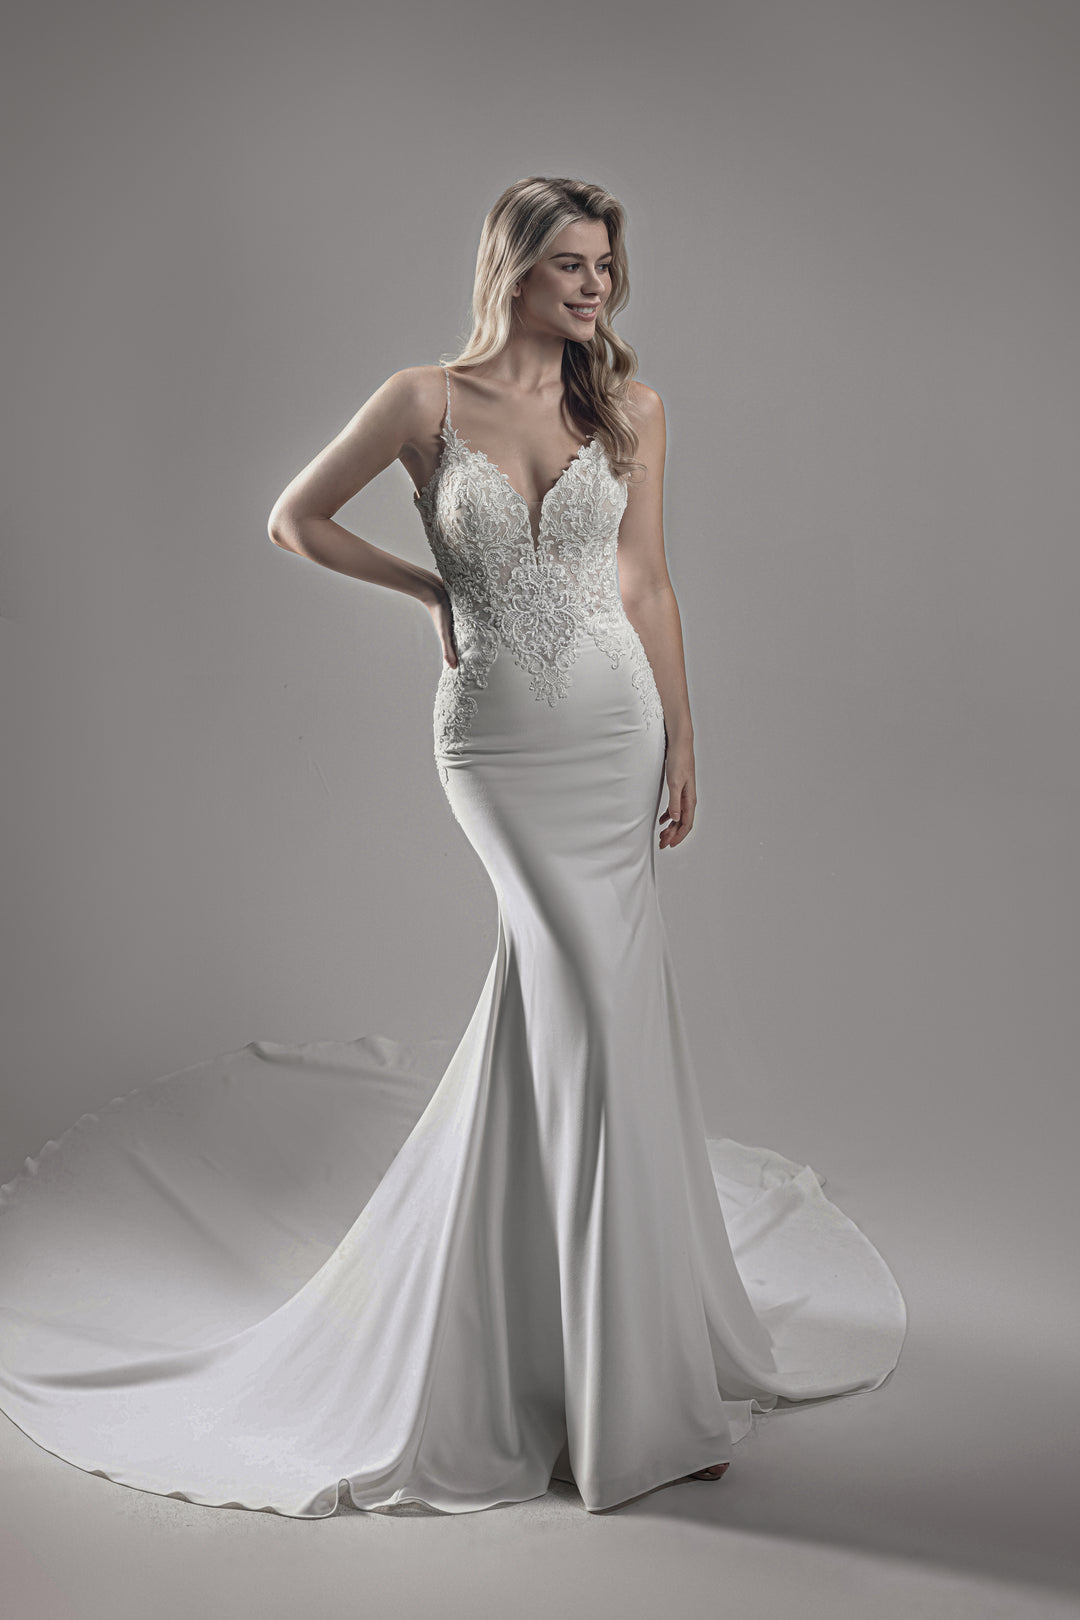 Crepe Fit and flare wedding dress